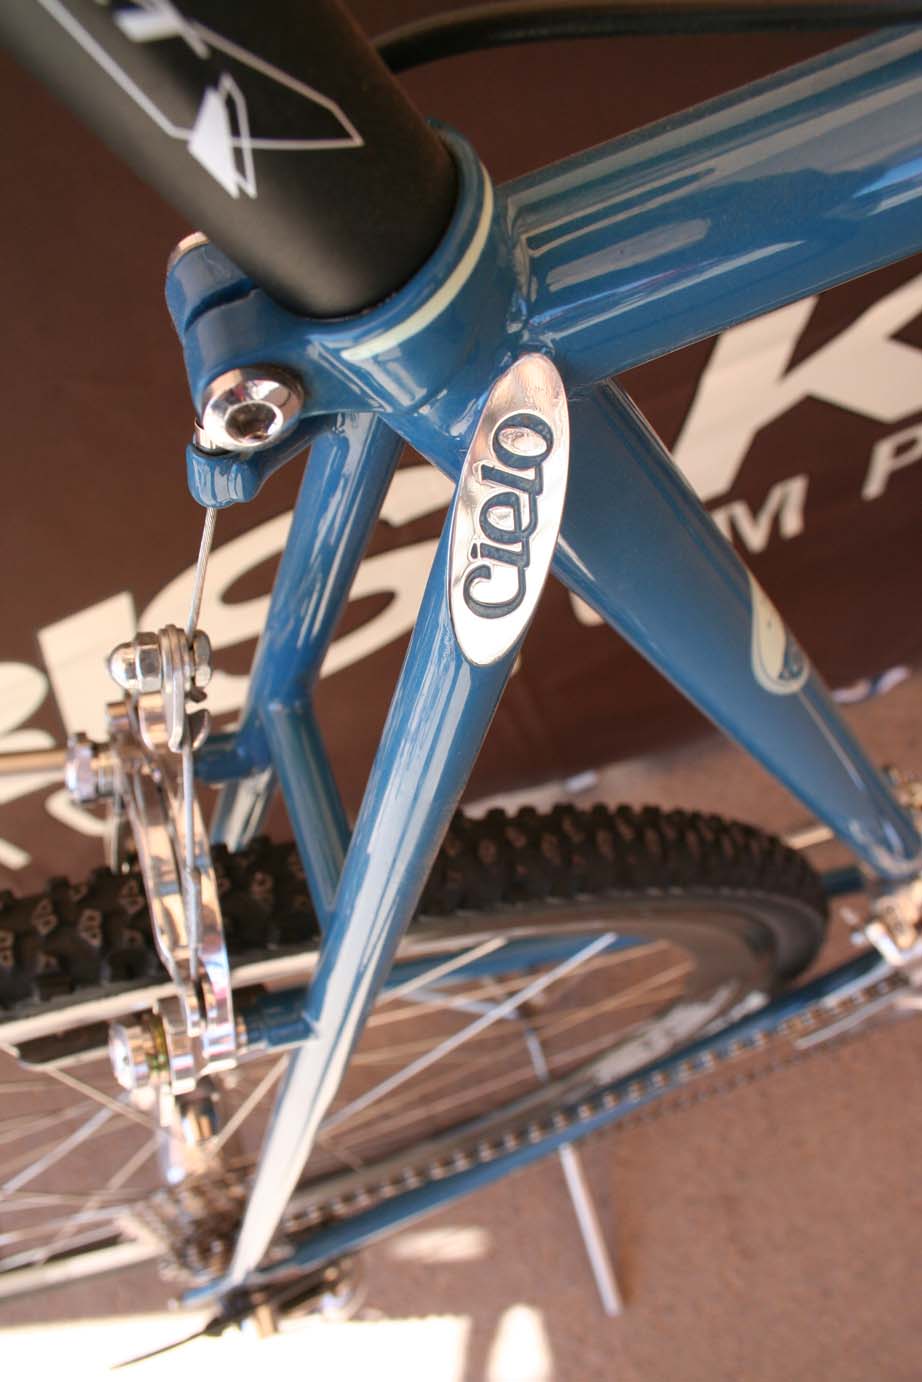 Cielo makes its own fork crown, seat stay junction, and dropouts.